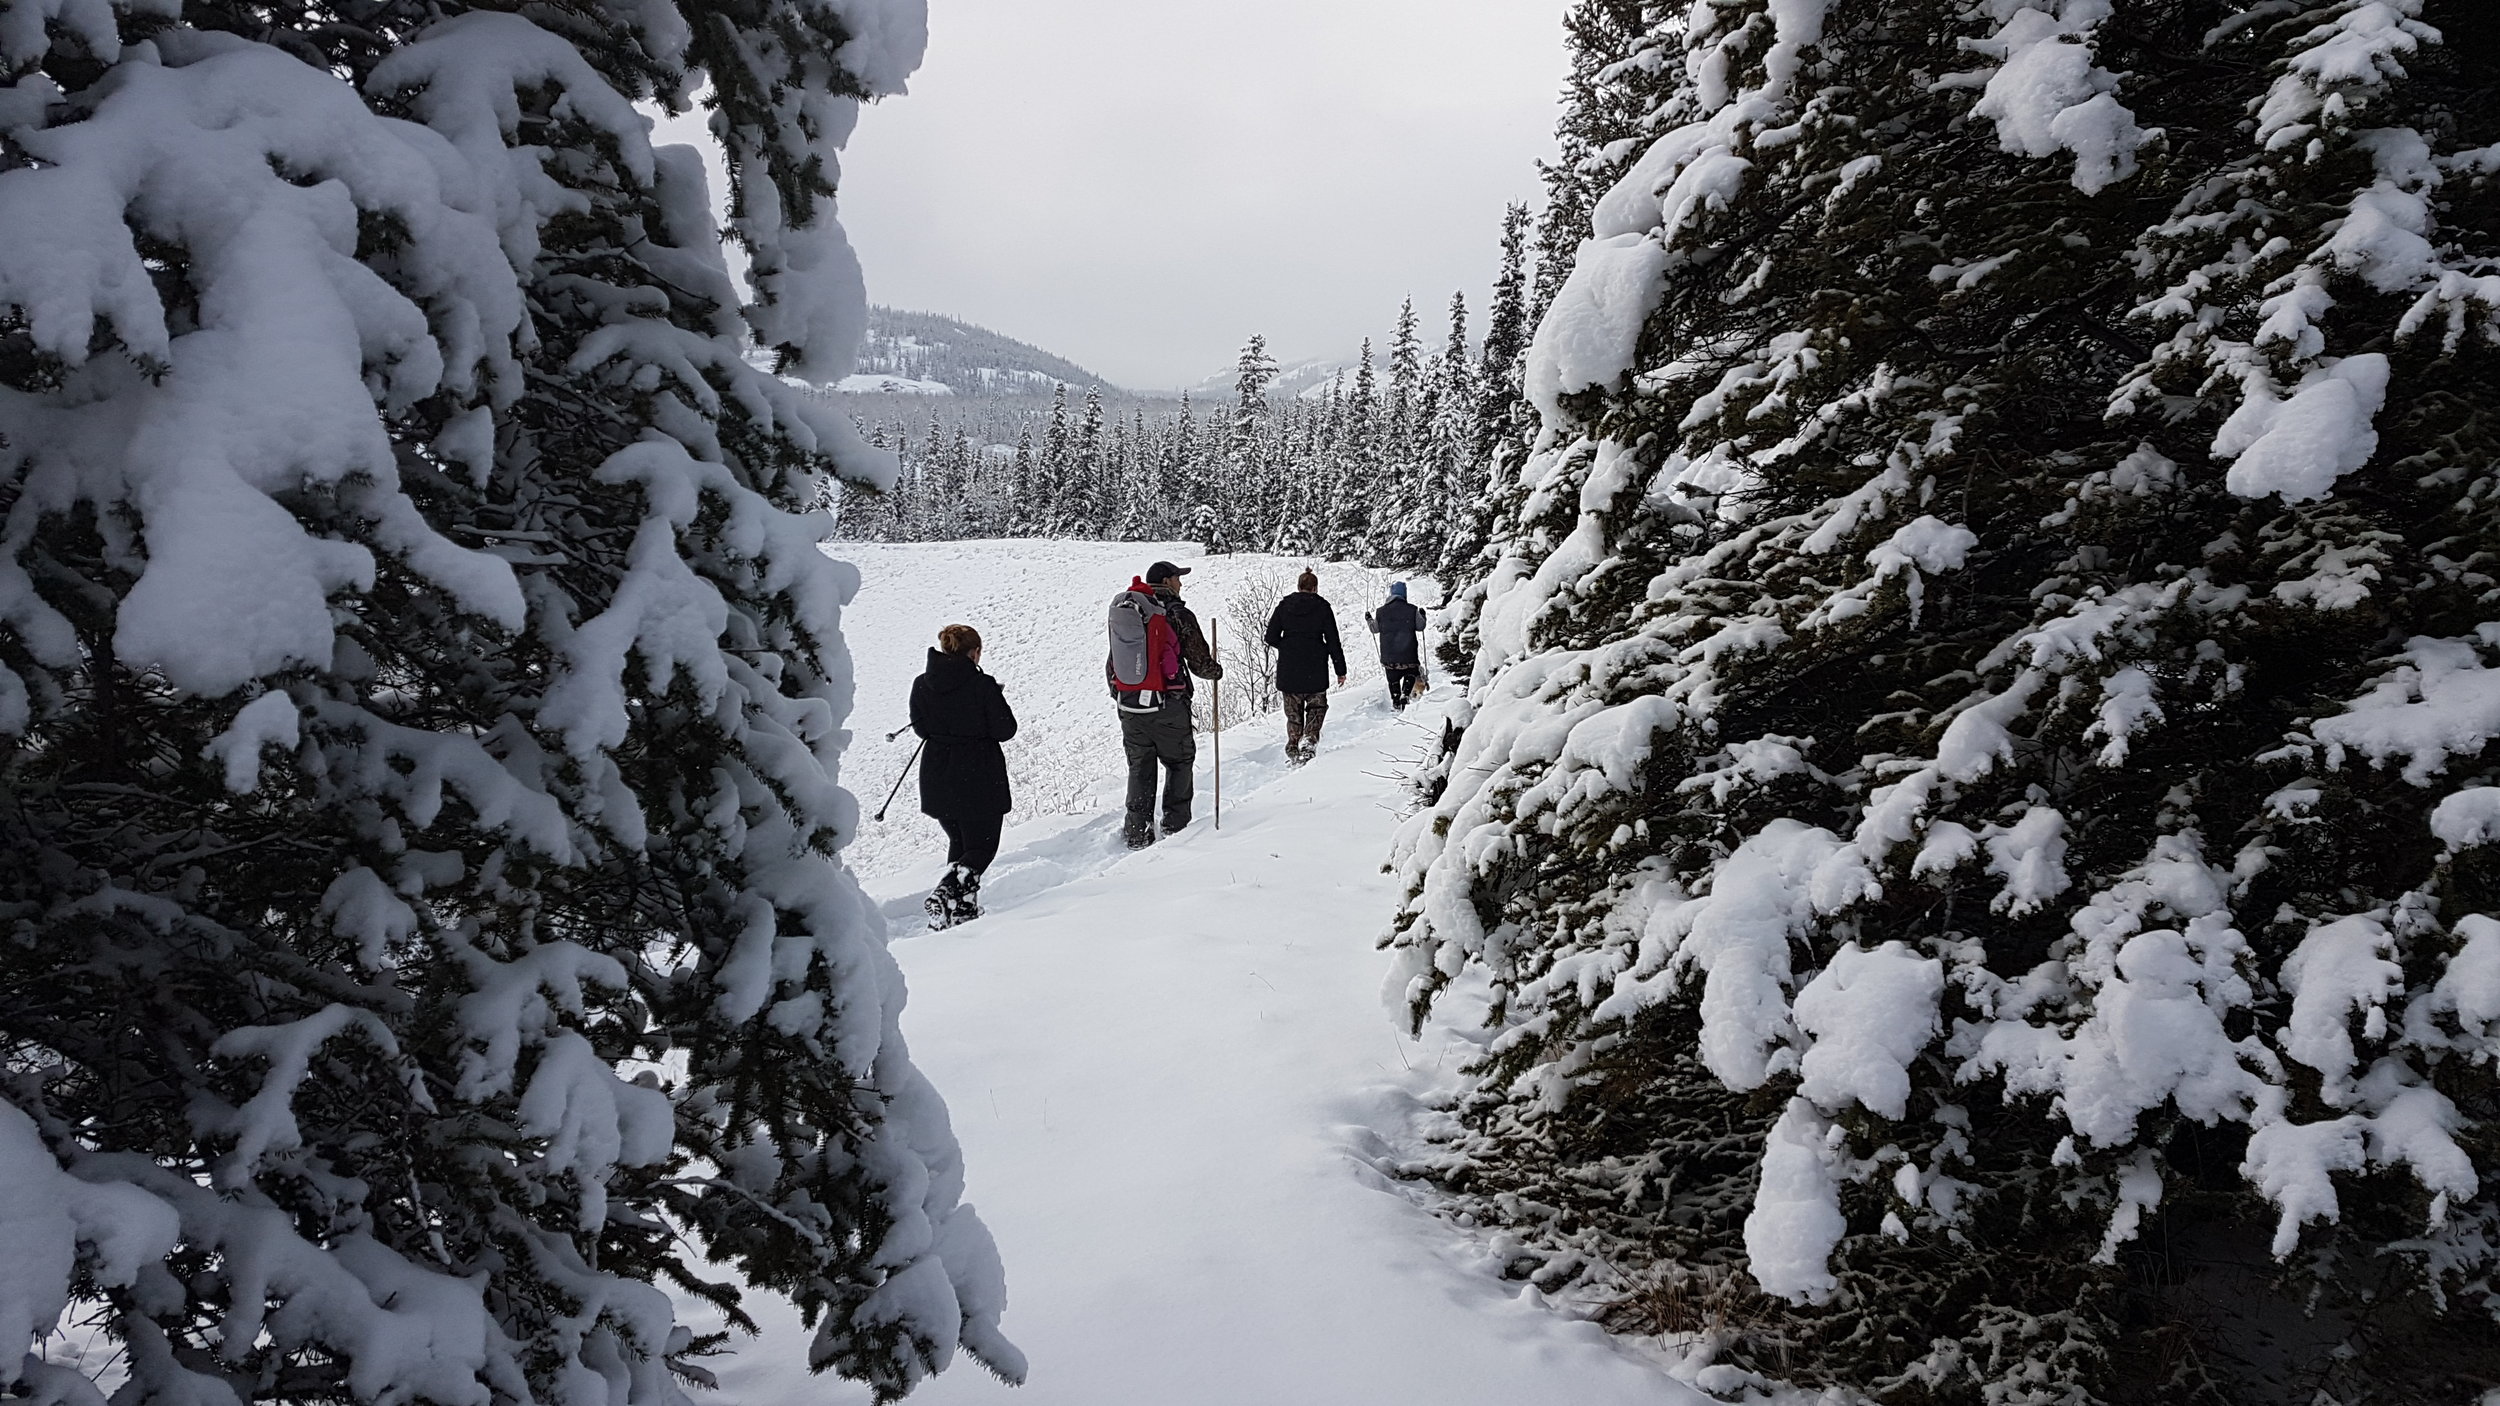  &nbsp; &nbsp; &nbsp; &nbsp; &nbsp;Our small group tours offer an excellent opportunity to experience winter in a new way 